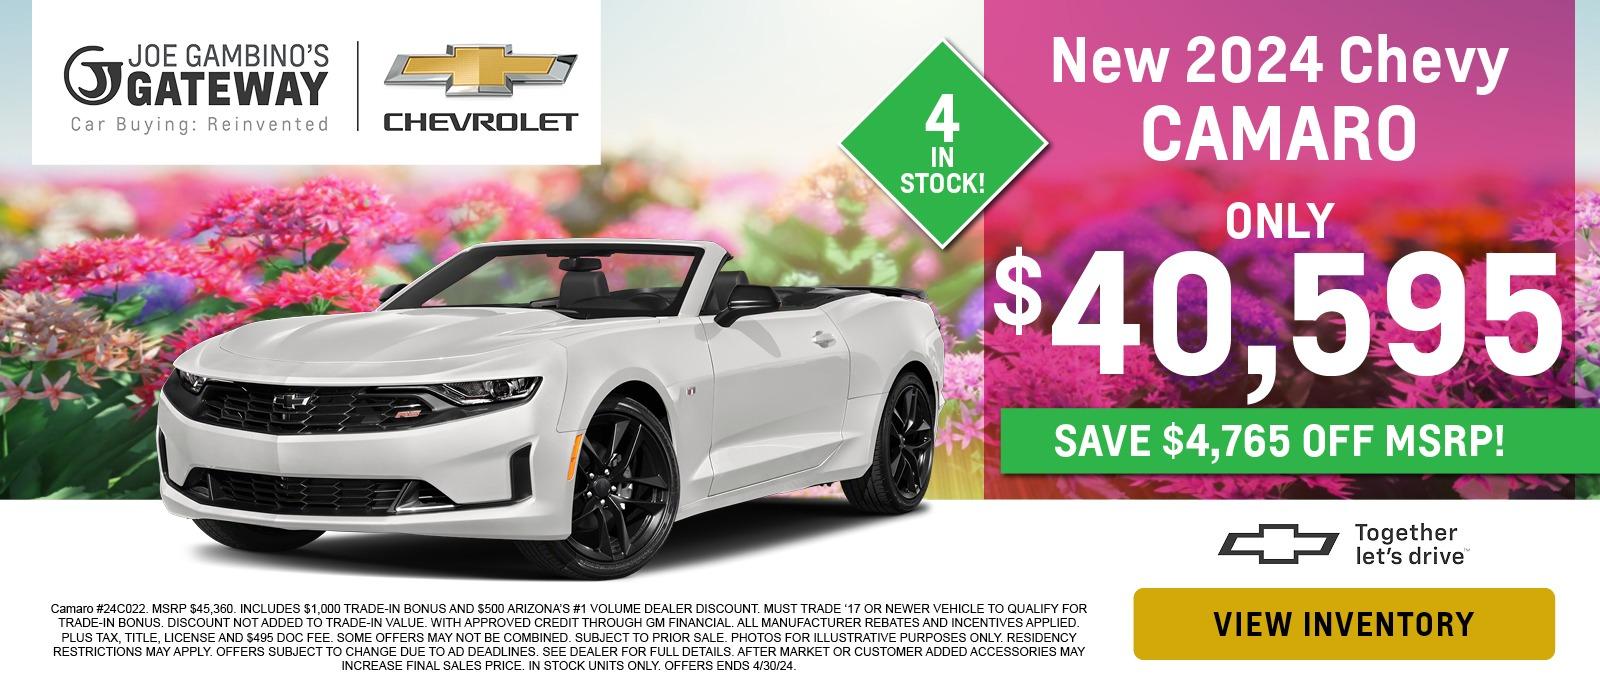 New 2024 Chevy Camaro
Only $40,595
Save $4,765 off MSRP!